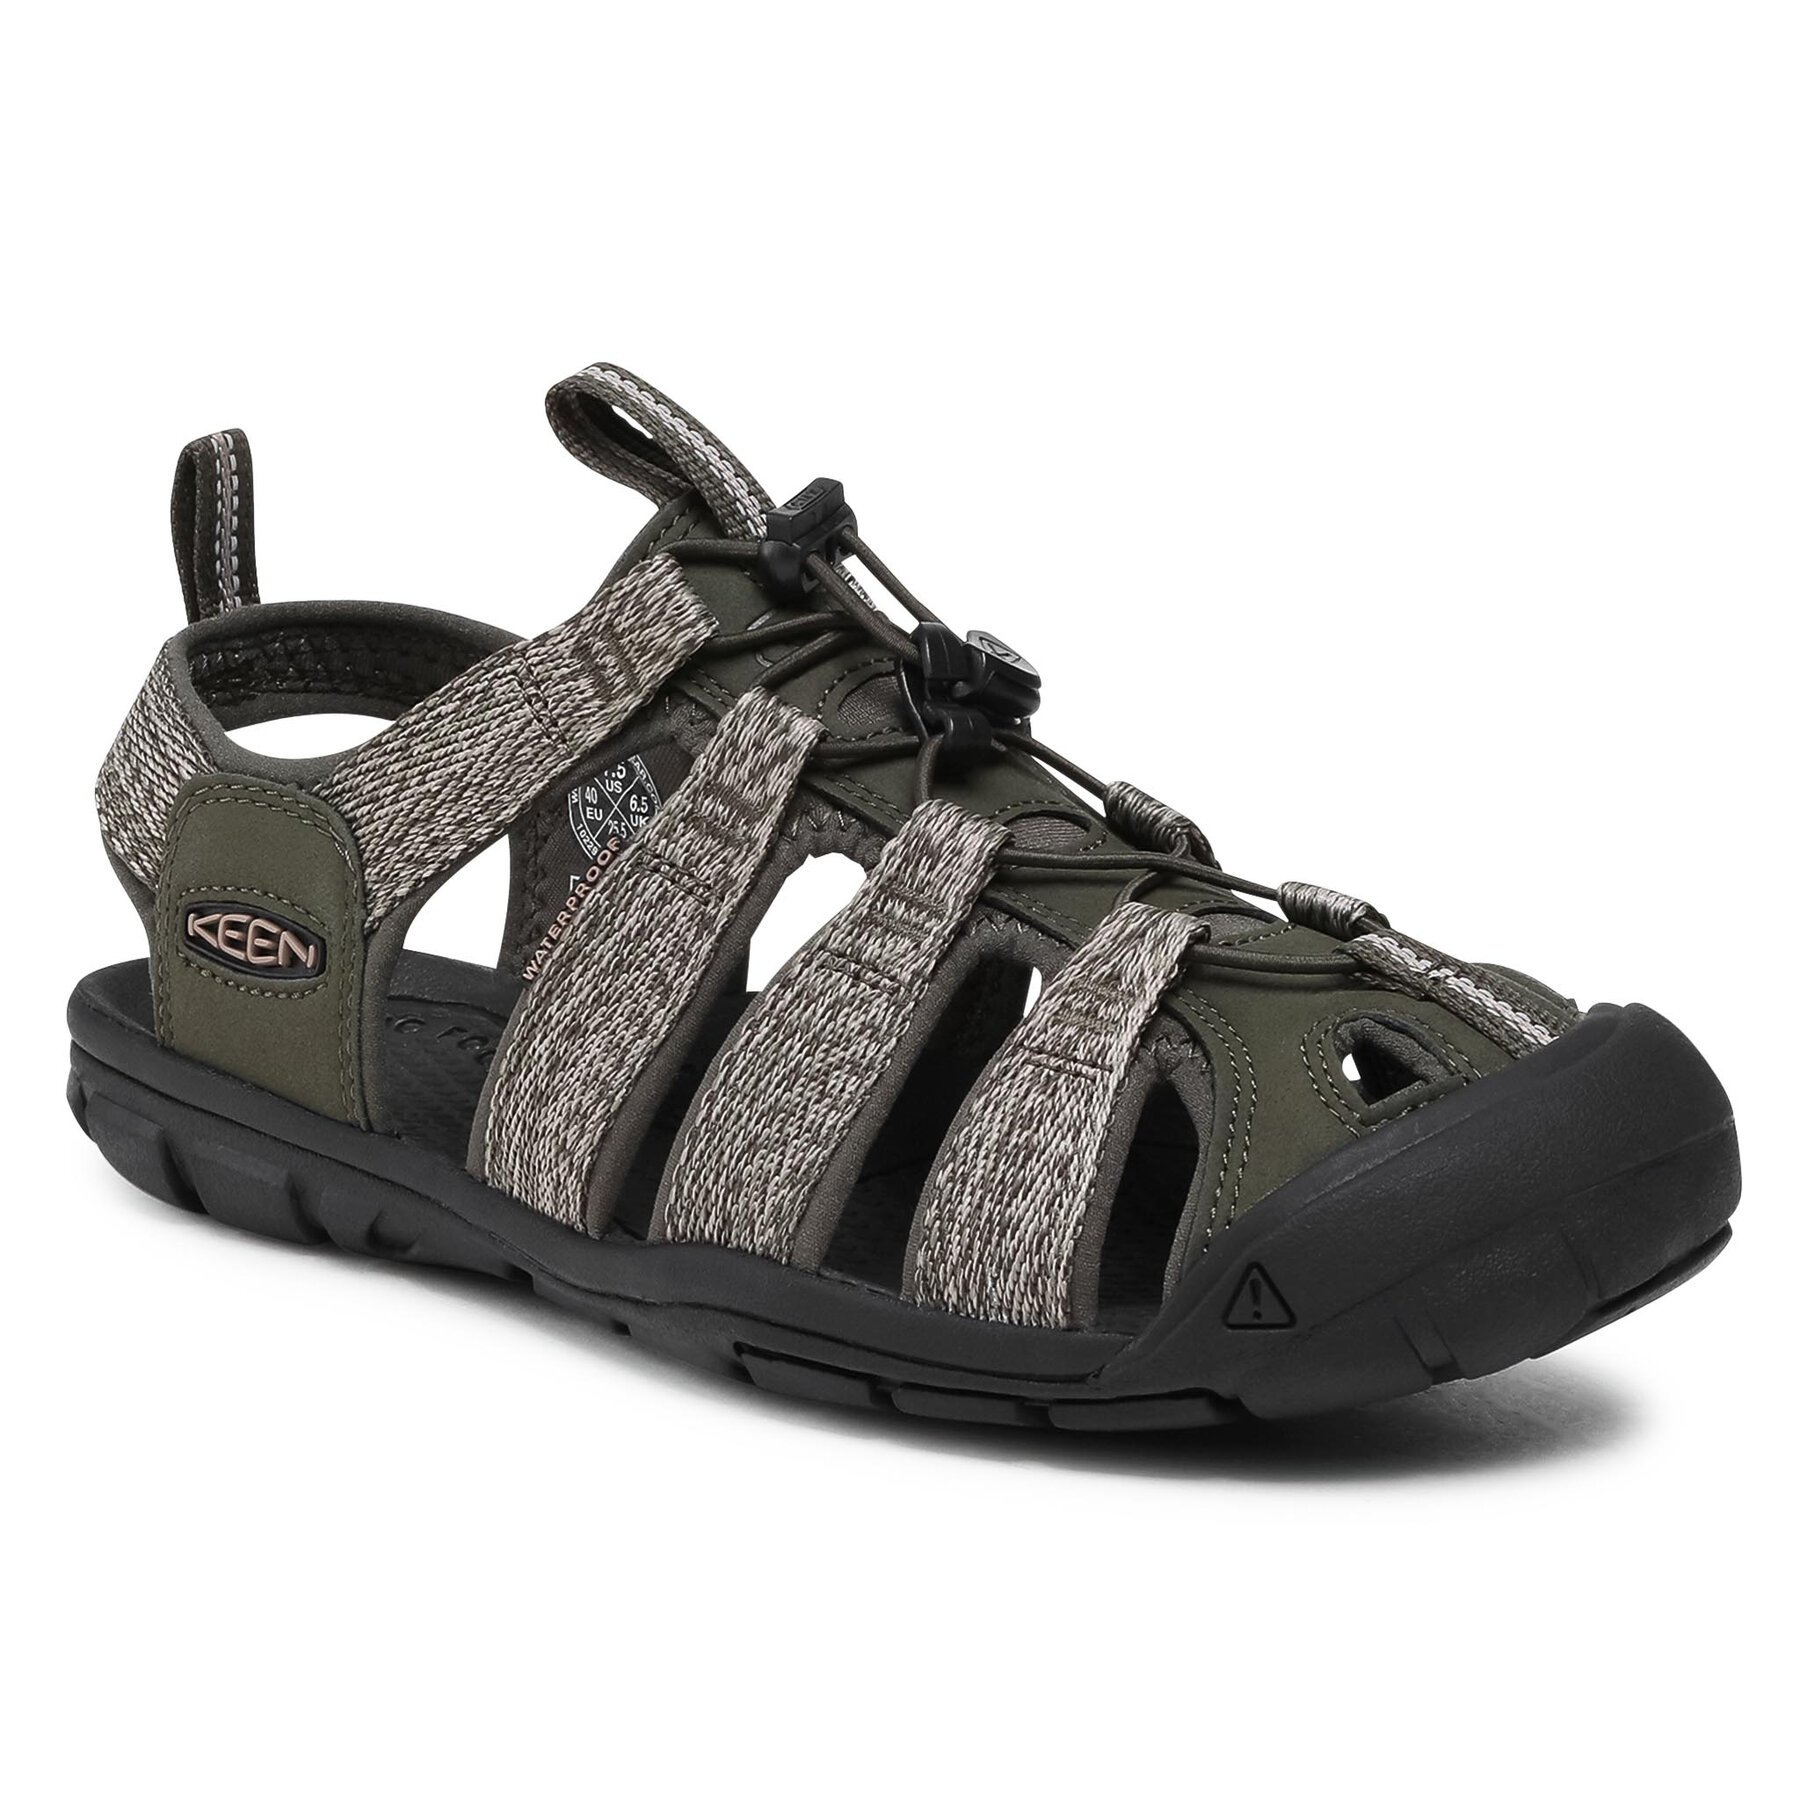 Sandale Keen Clearwater Cnx 1022961 Forest Night/Black 1022961 imagine noua